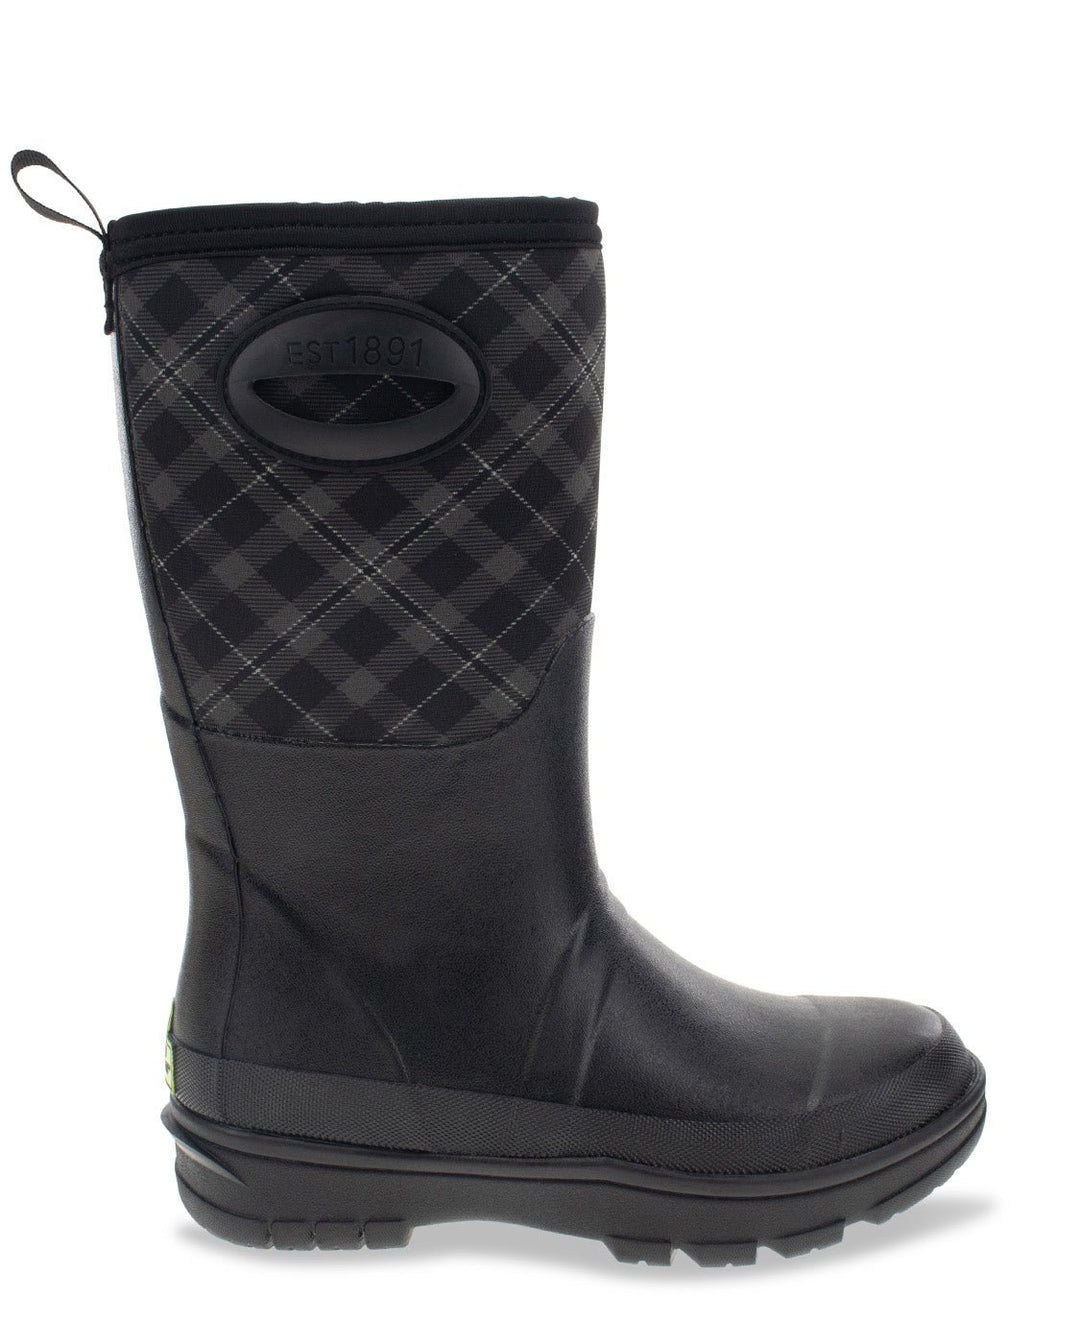 Women's Plaid Neoprene Mid Cold Weather Boot - Black - Western Chief